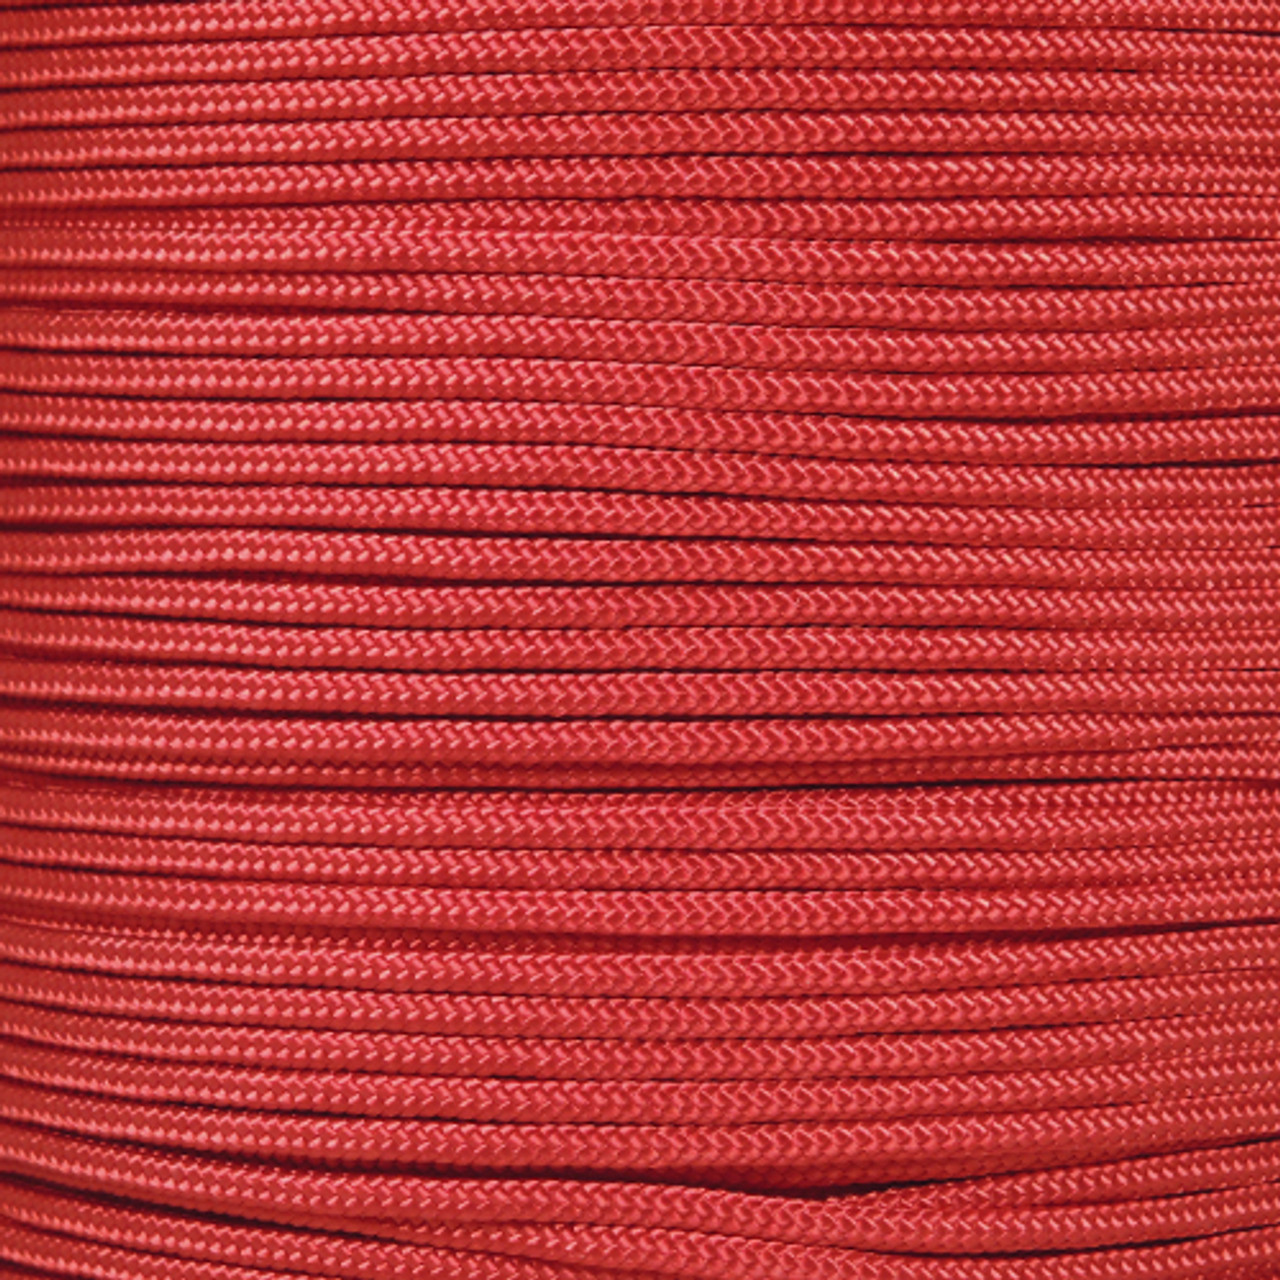 Imperial Red - 325 Paracord